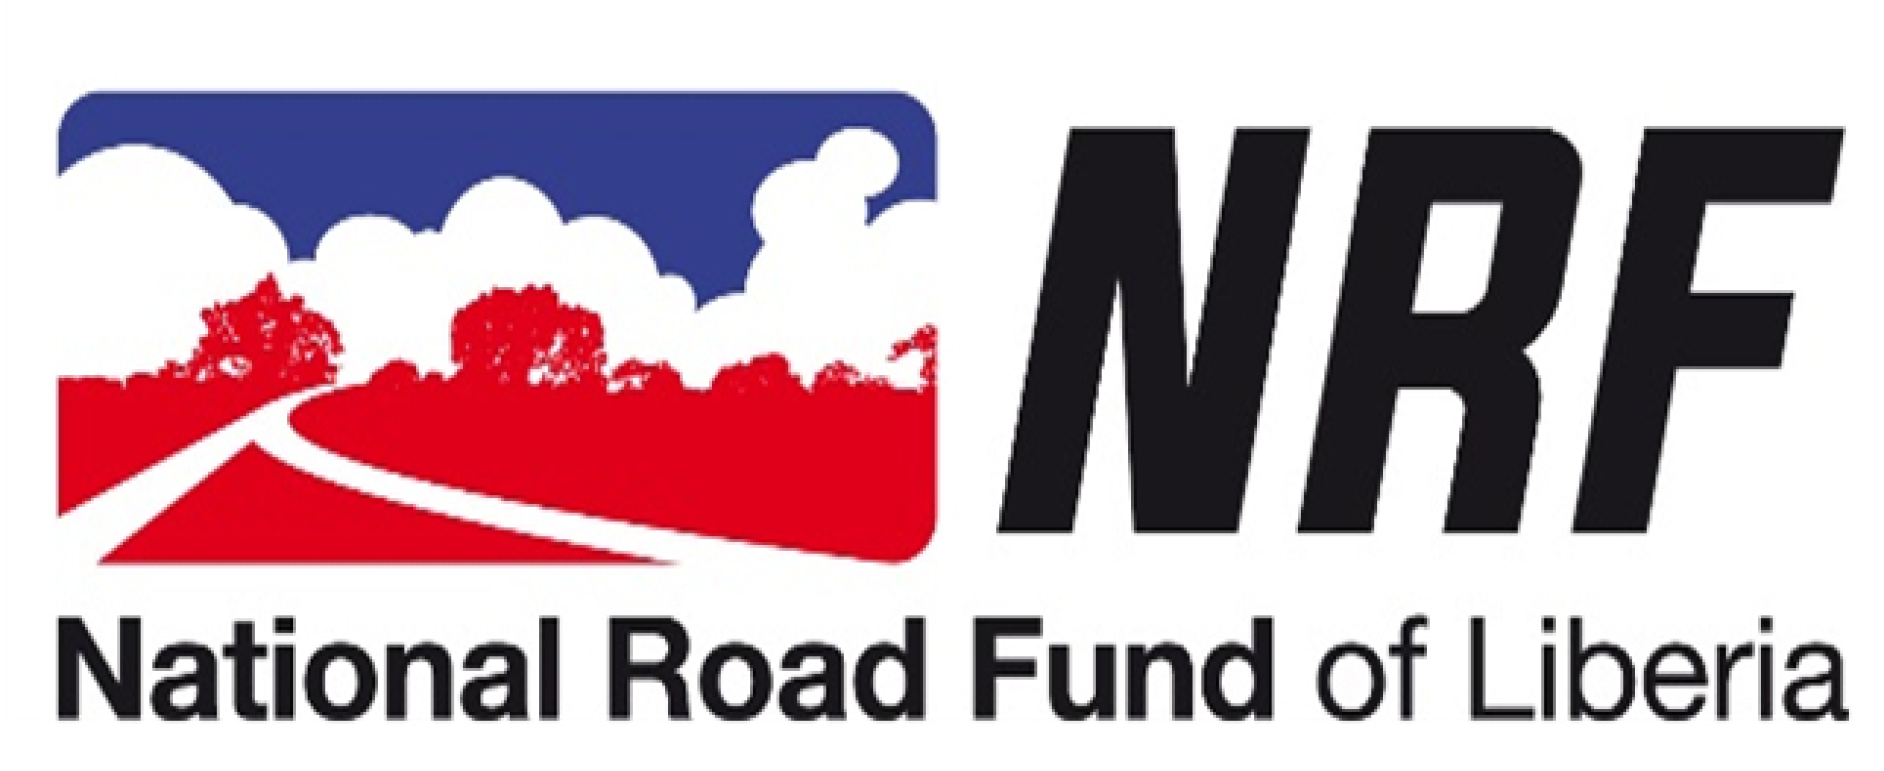 logo of National Road Fund in Liberia